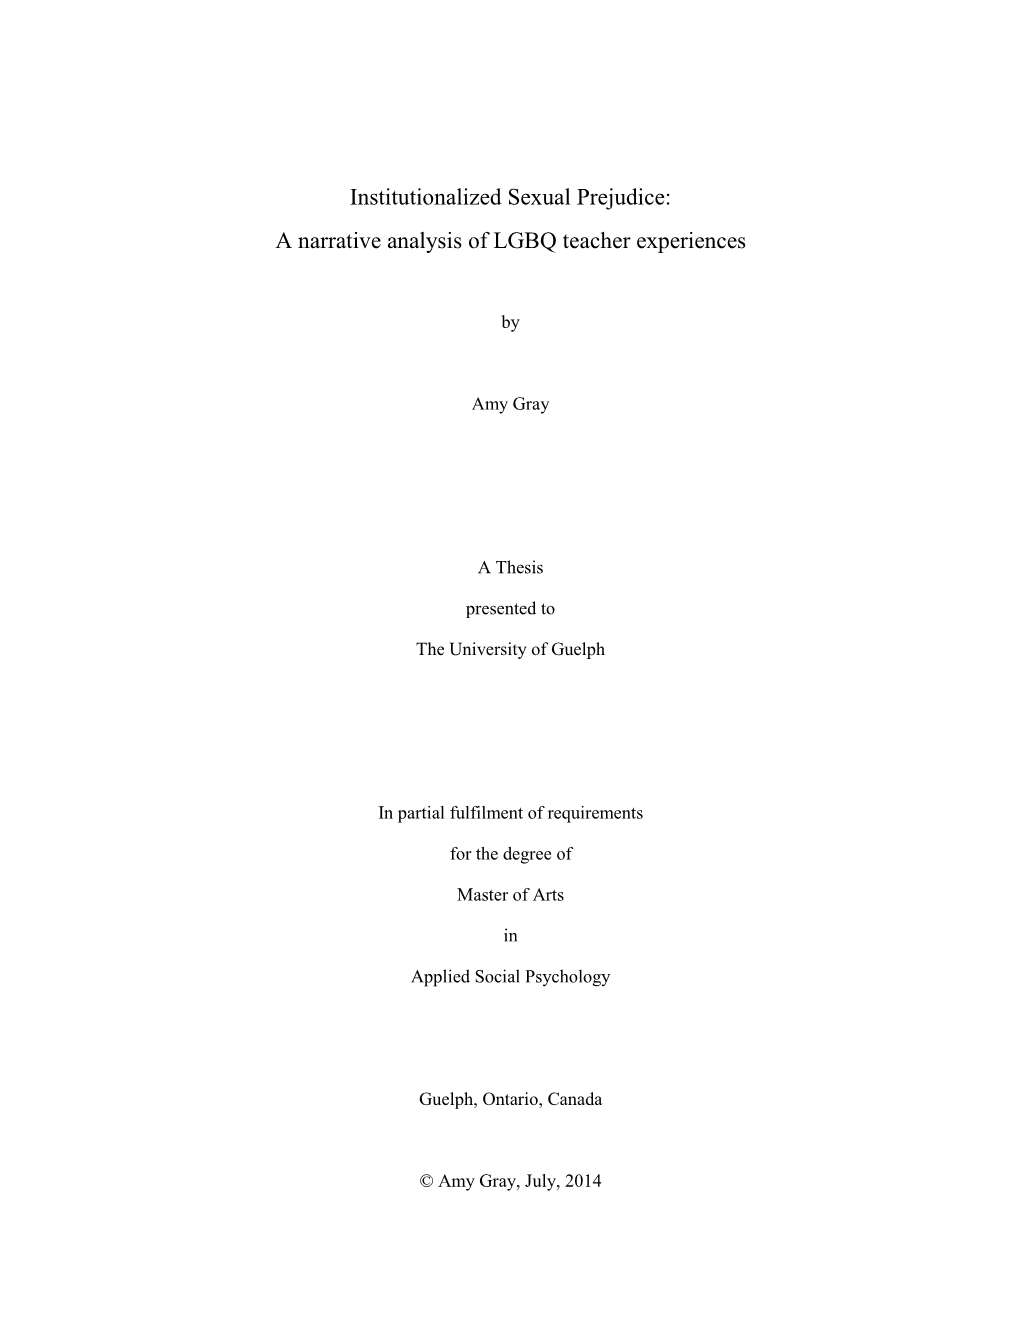 Institutionalized Sexual Prejudice: a Narrative Analysis of LGBQ Teacher Experiences